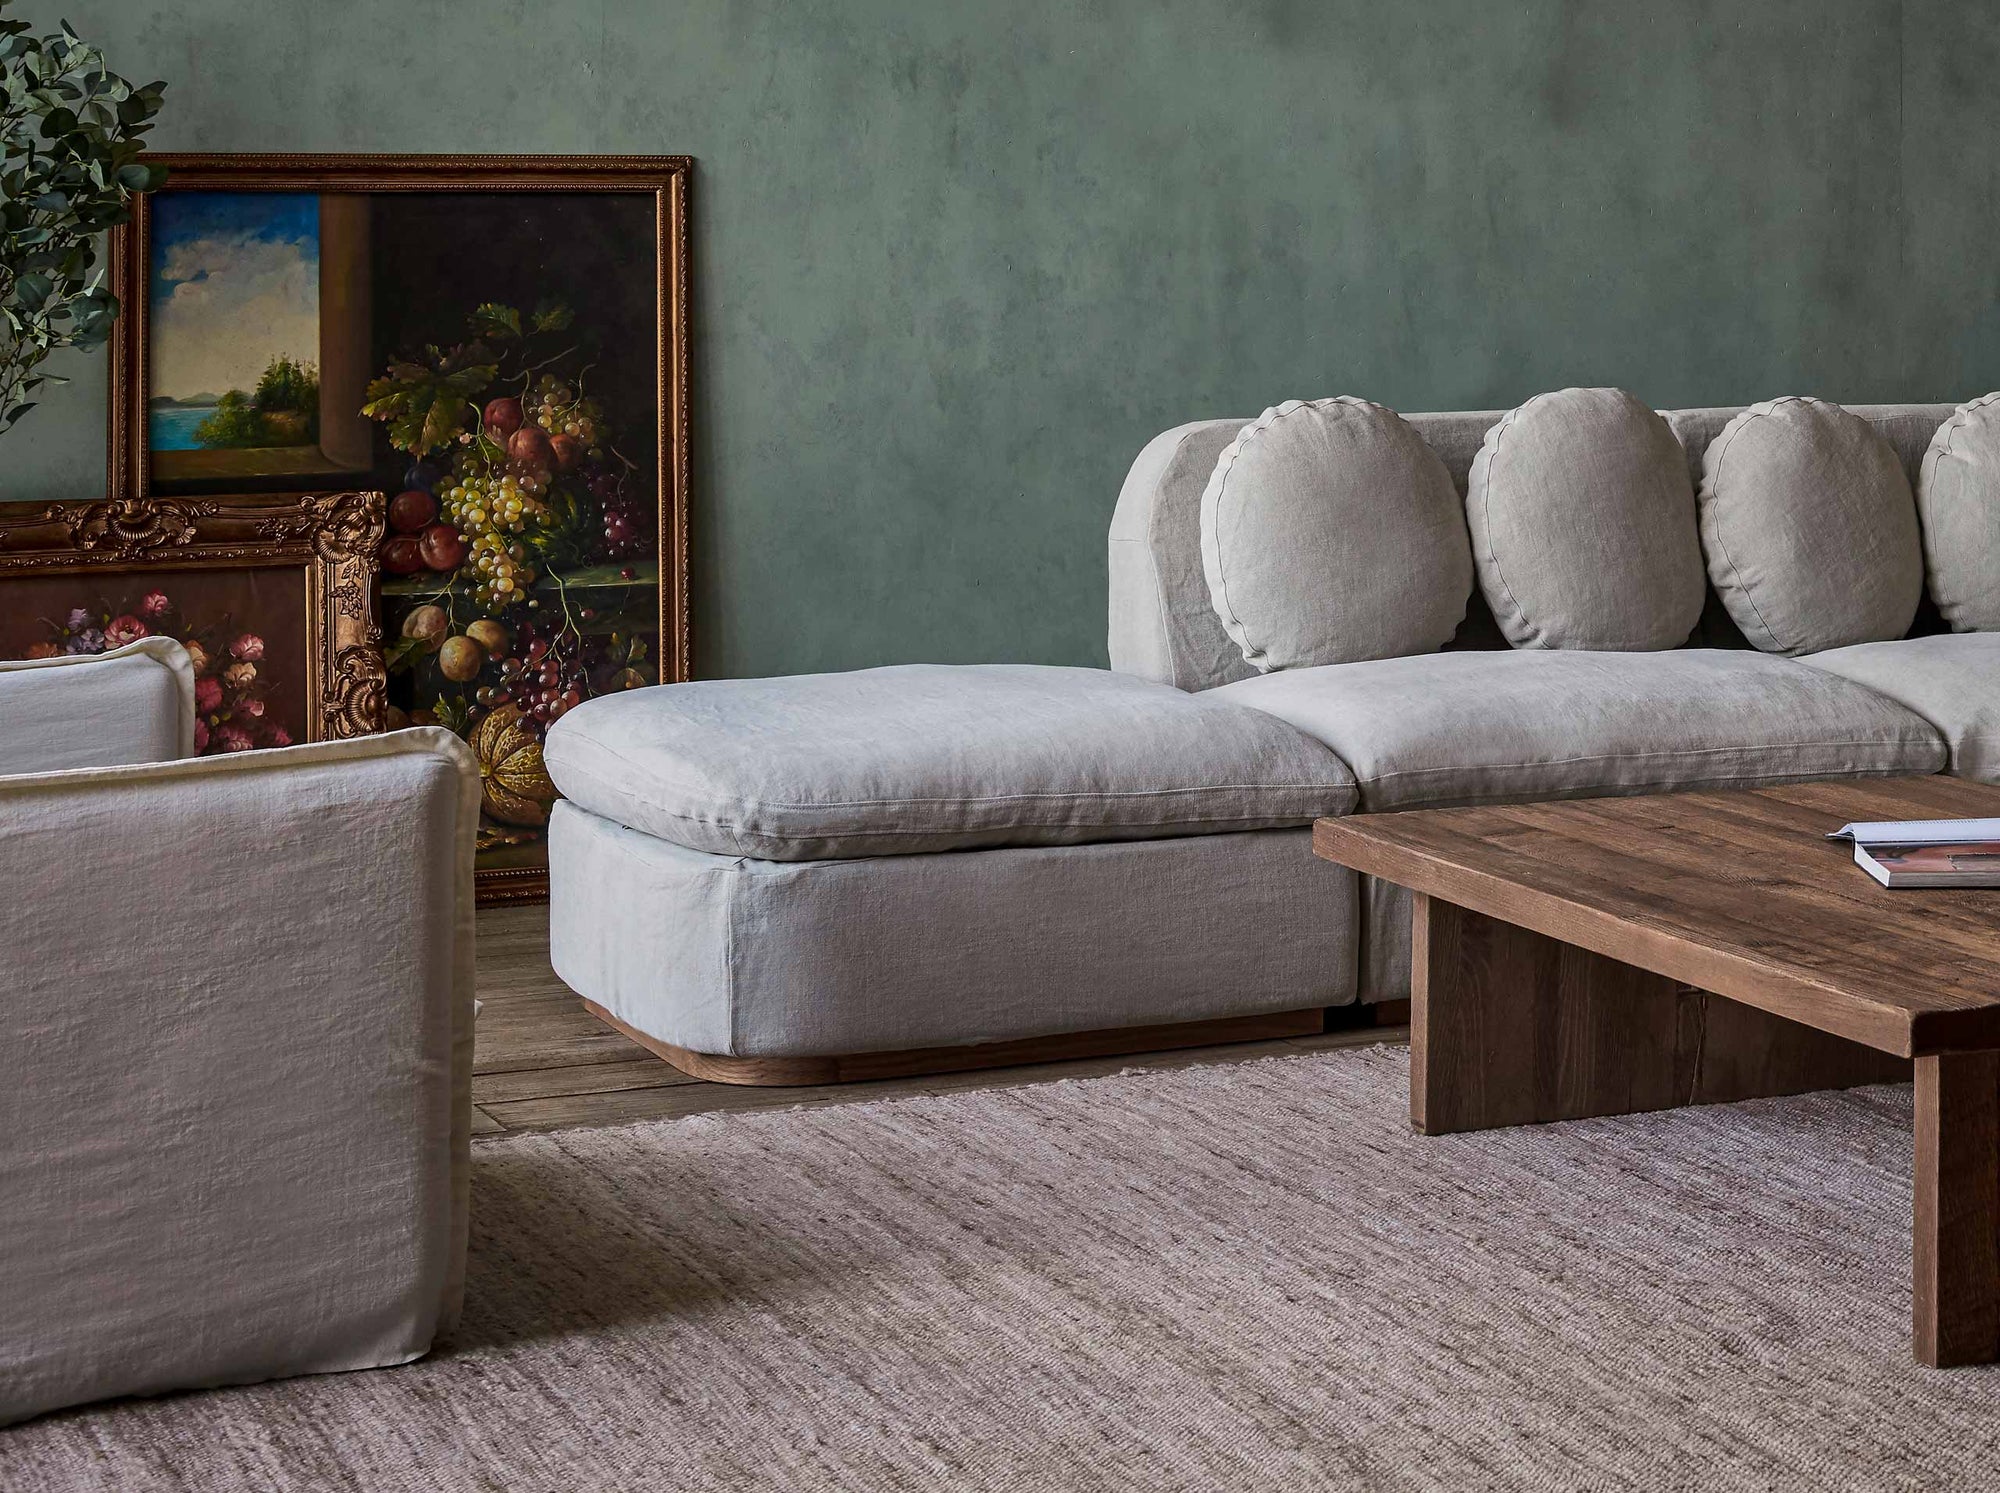 Olea Sectional Ottoman in Jasmine Rice, a light warm greige Medium Weight Linen, placed with the Olea Sectional and a Kai Coffee Table